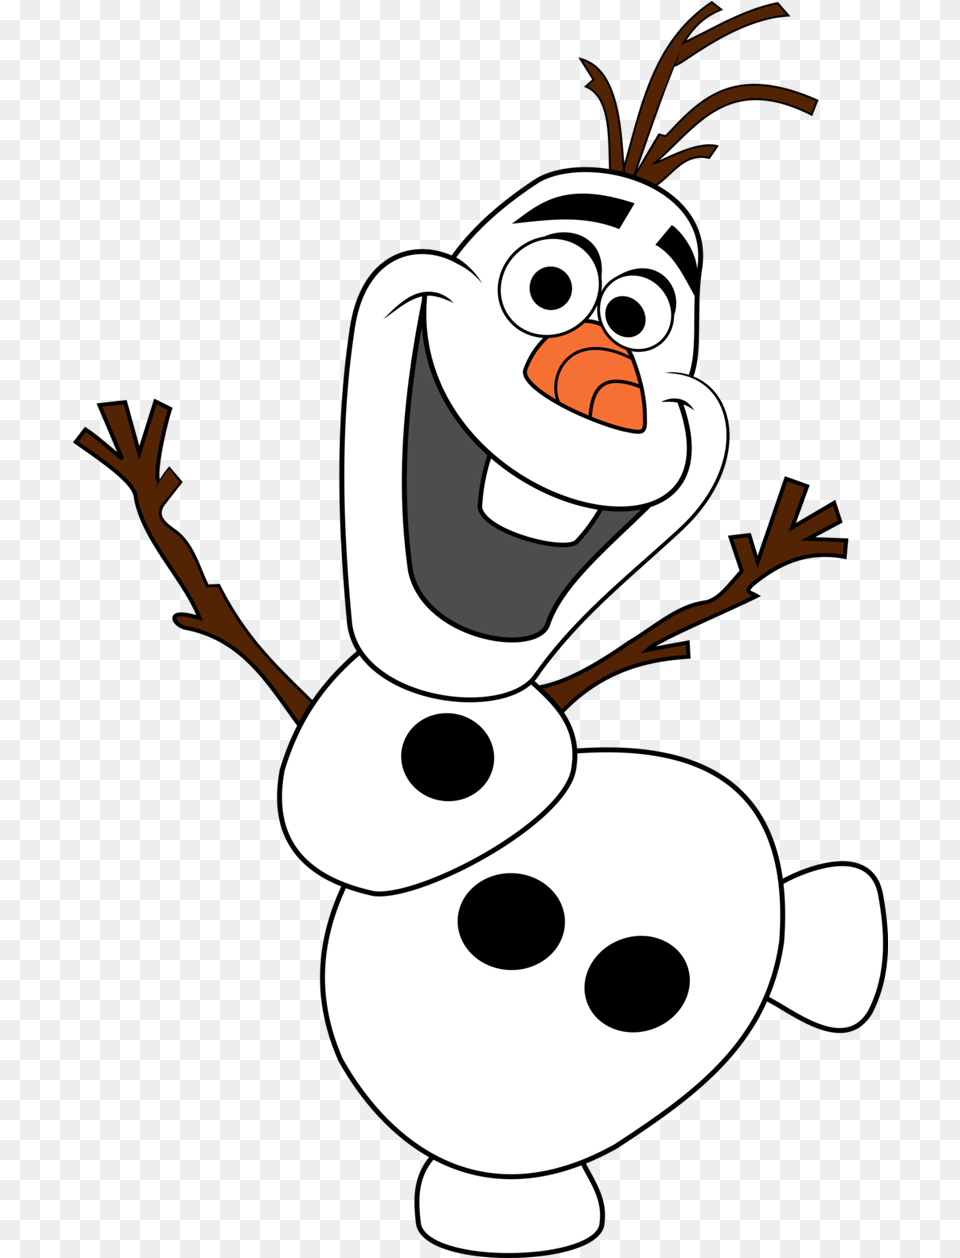 Olaf Cute Image Olaf Frozen Cartoon, Winter, Outdoors, Nature, Snow Free Png